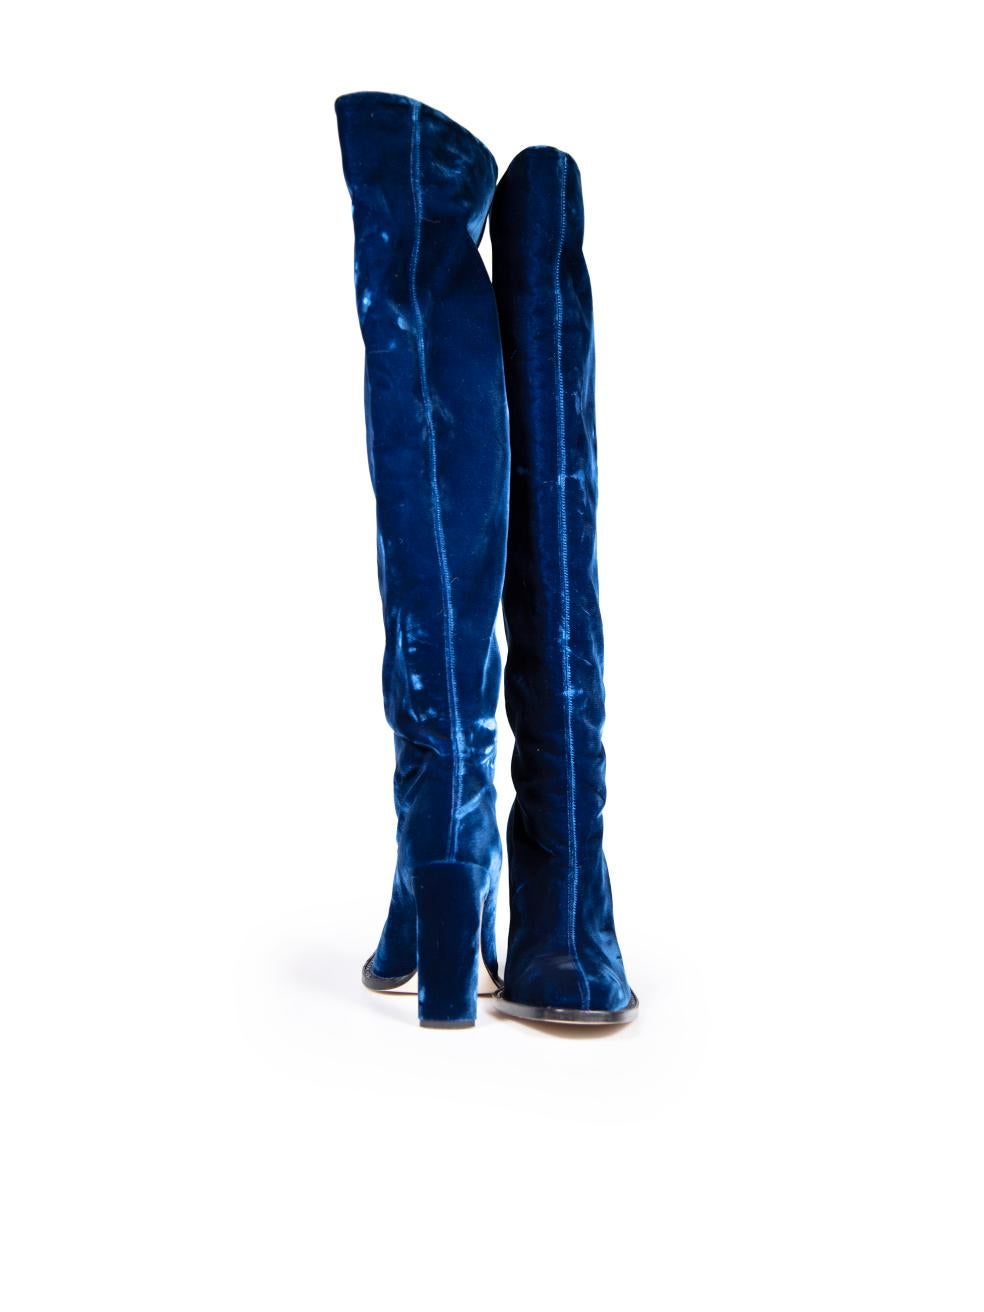 Tamara Mellon Blue Velvet Thigh High Boots Size IT 39.5 In Good Condition For Sale In London, GB